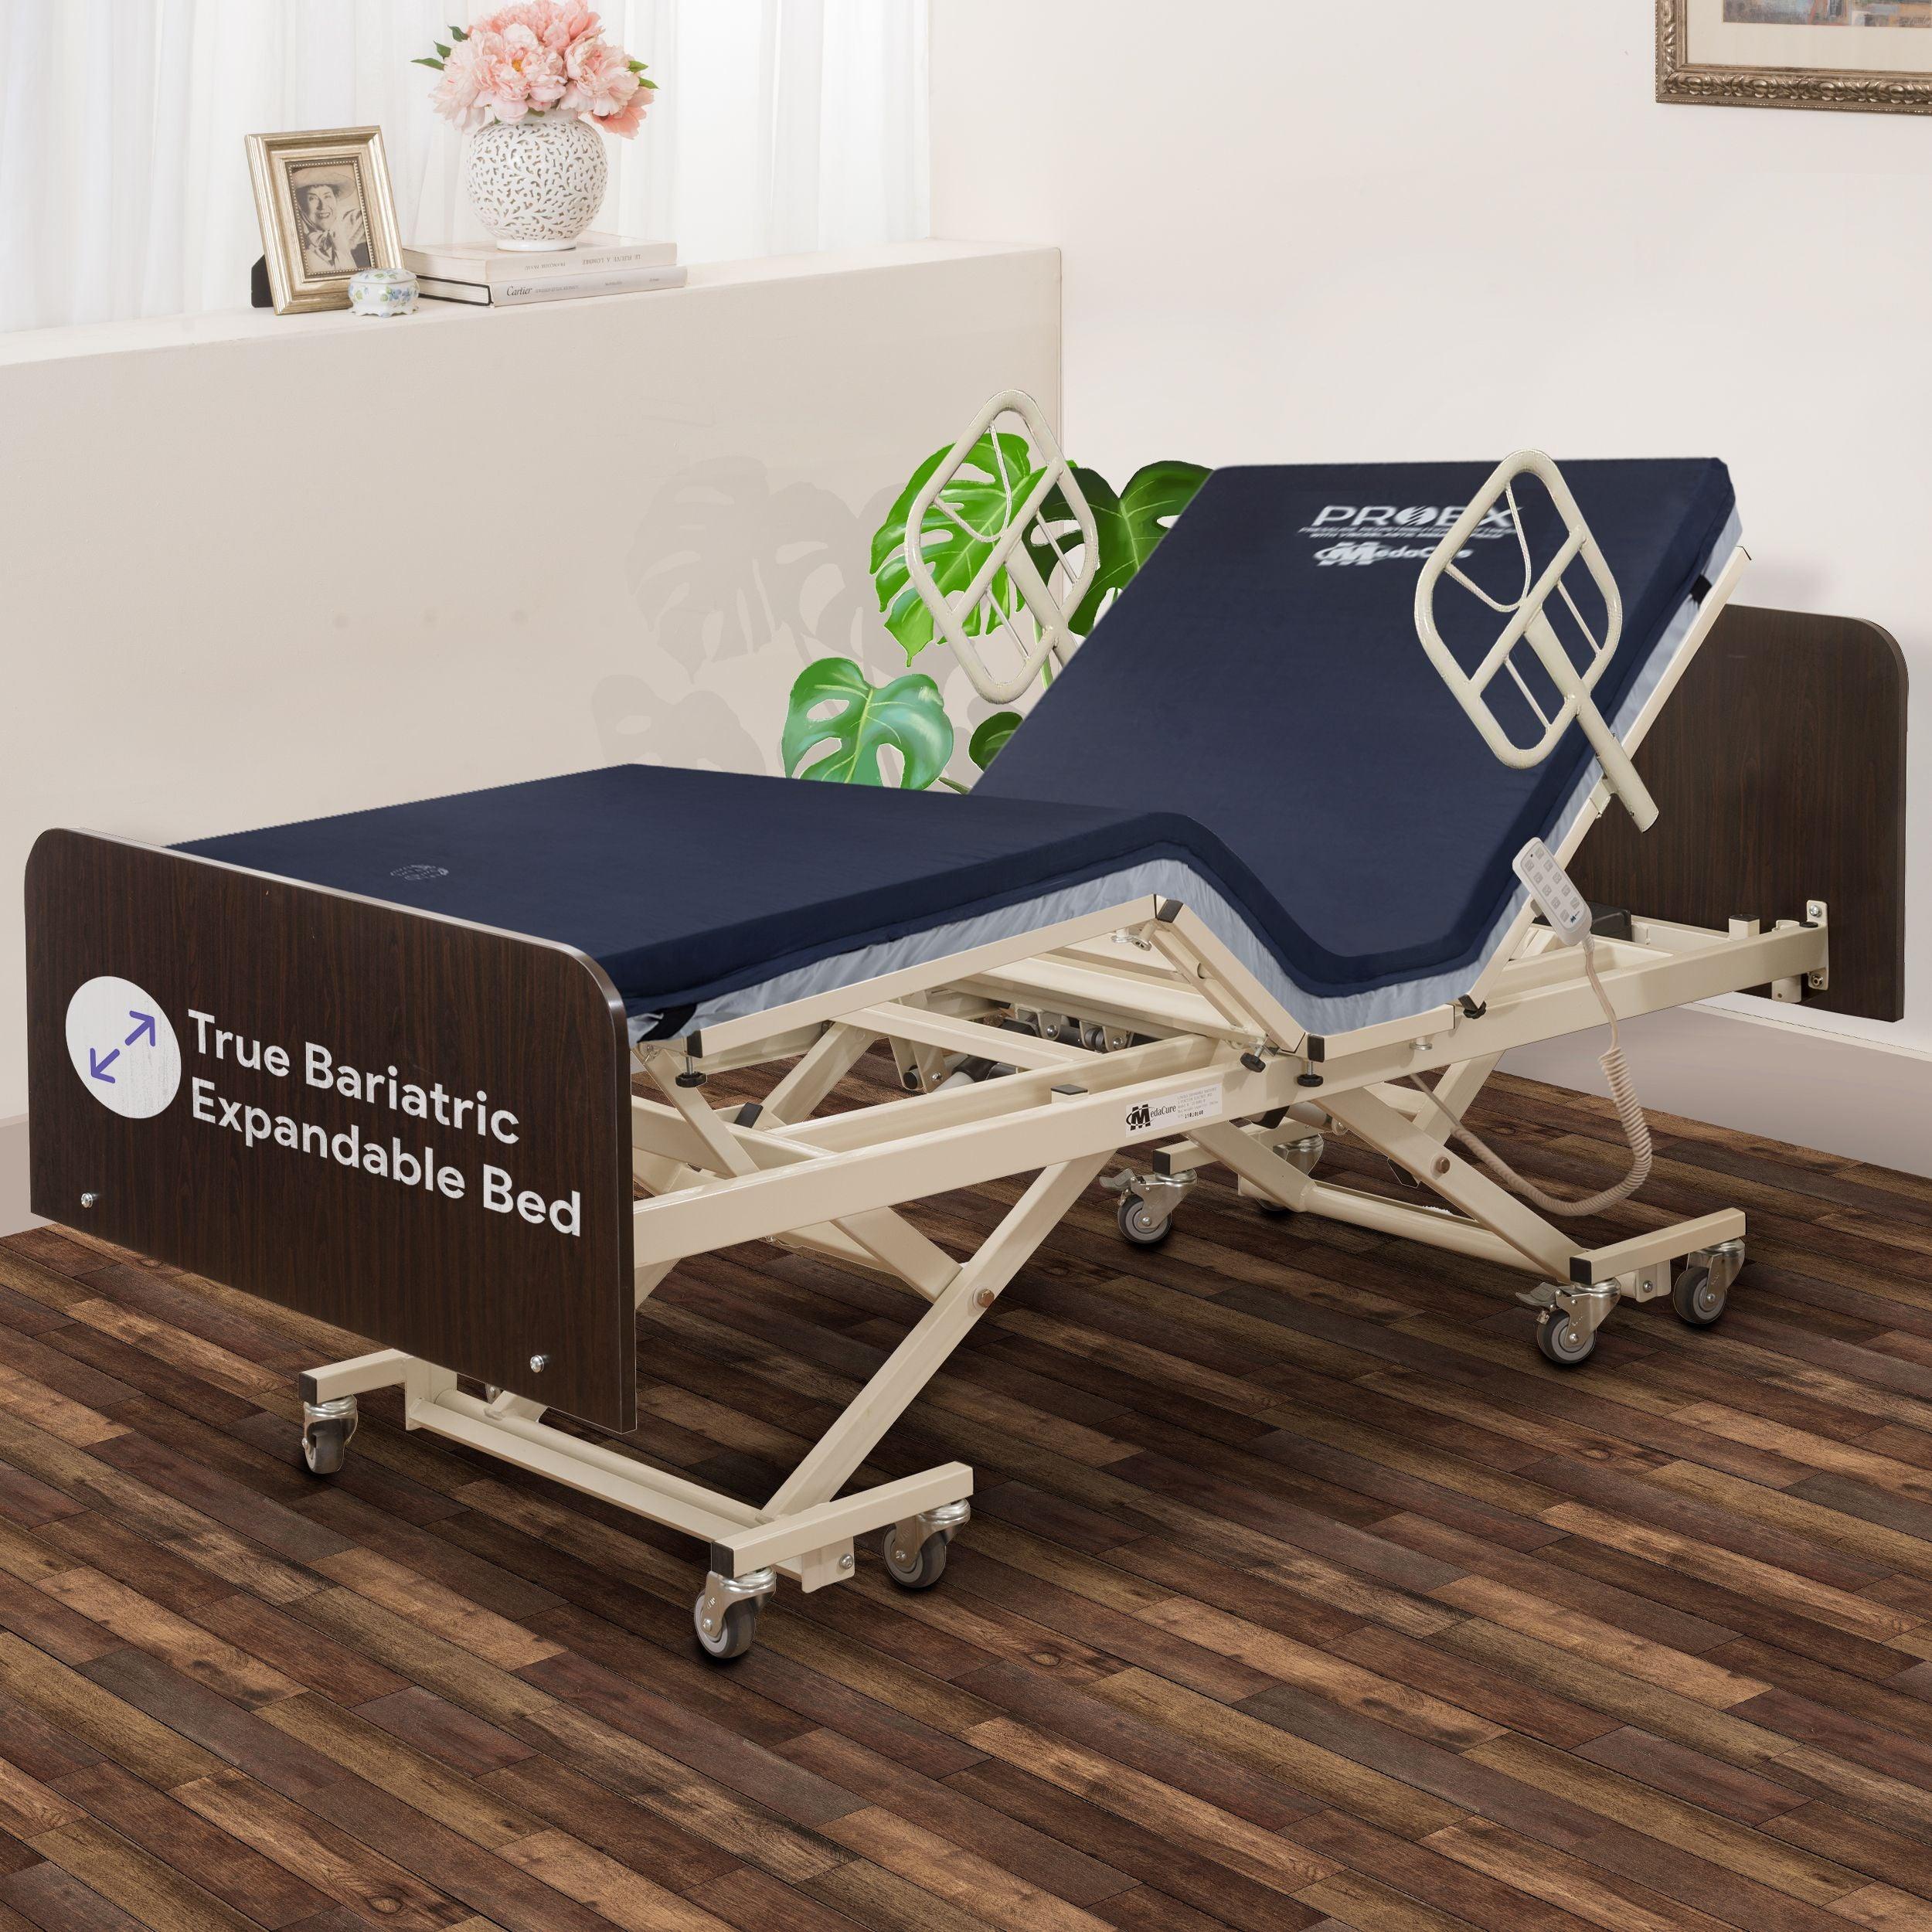 http://prohealproducts.com/cdn/shop/files/expandable-true-bariatric-hospital-bed-and-built-in-scale-proheal-products-1.jpg?v=1689335224